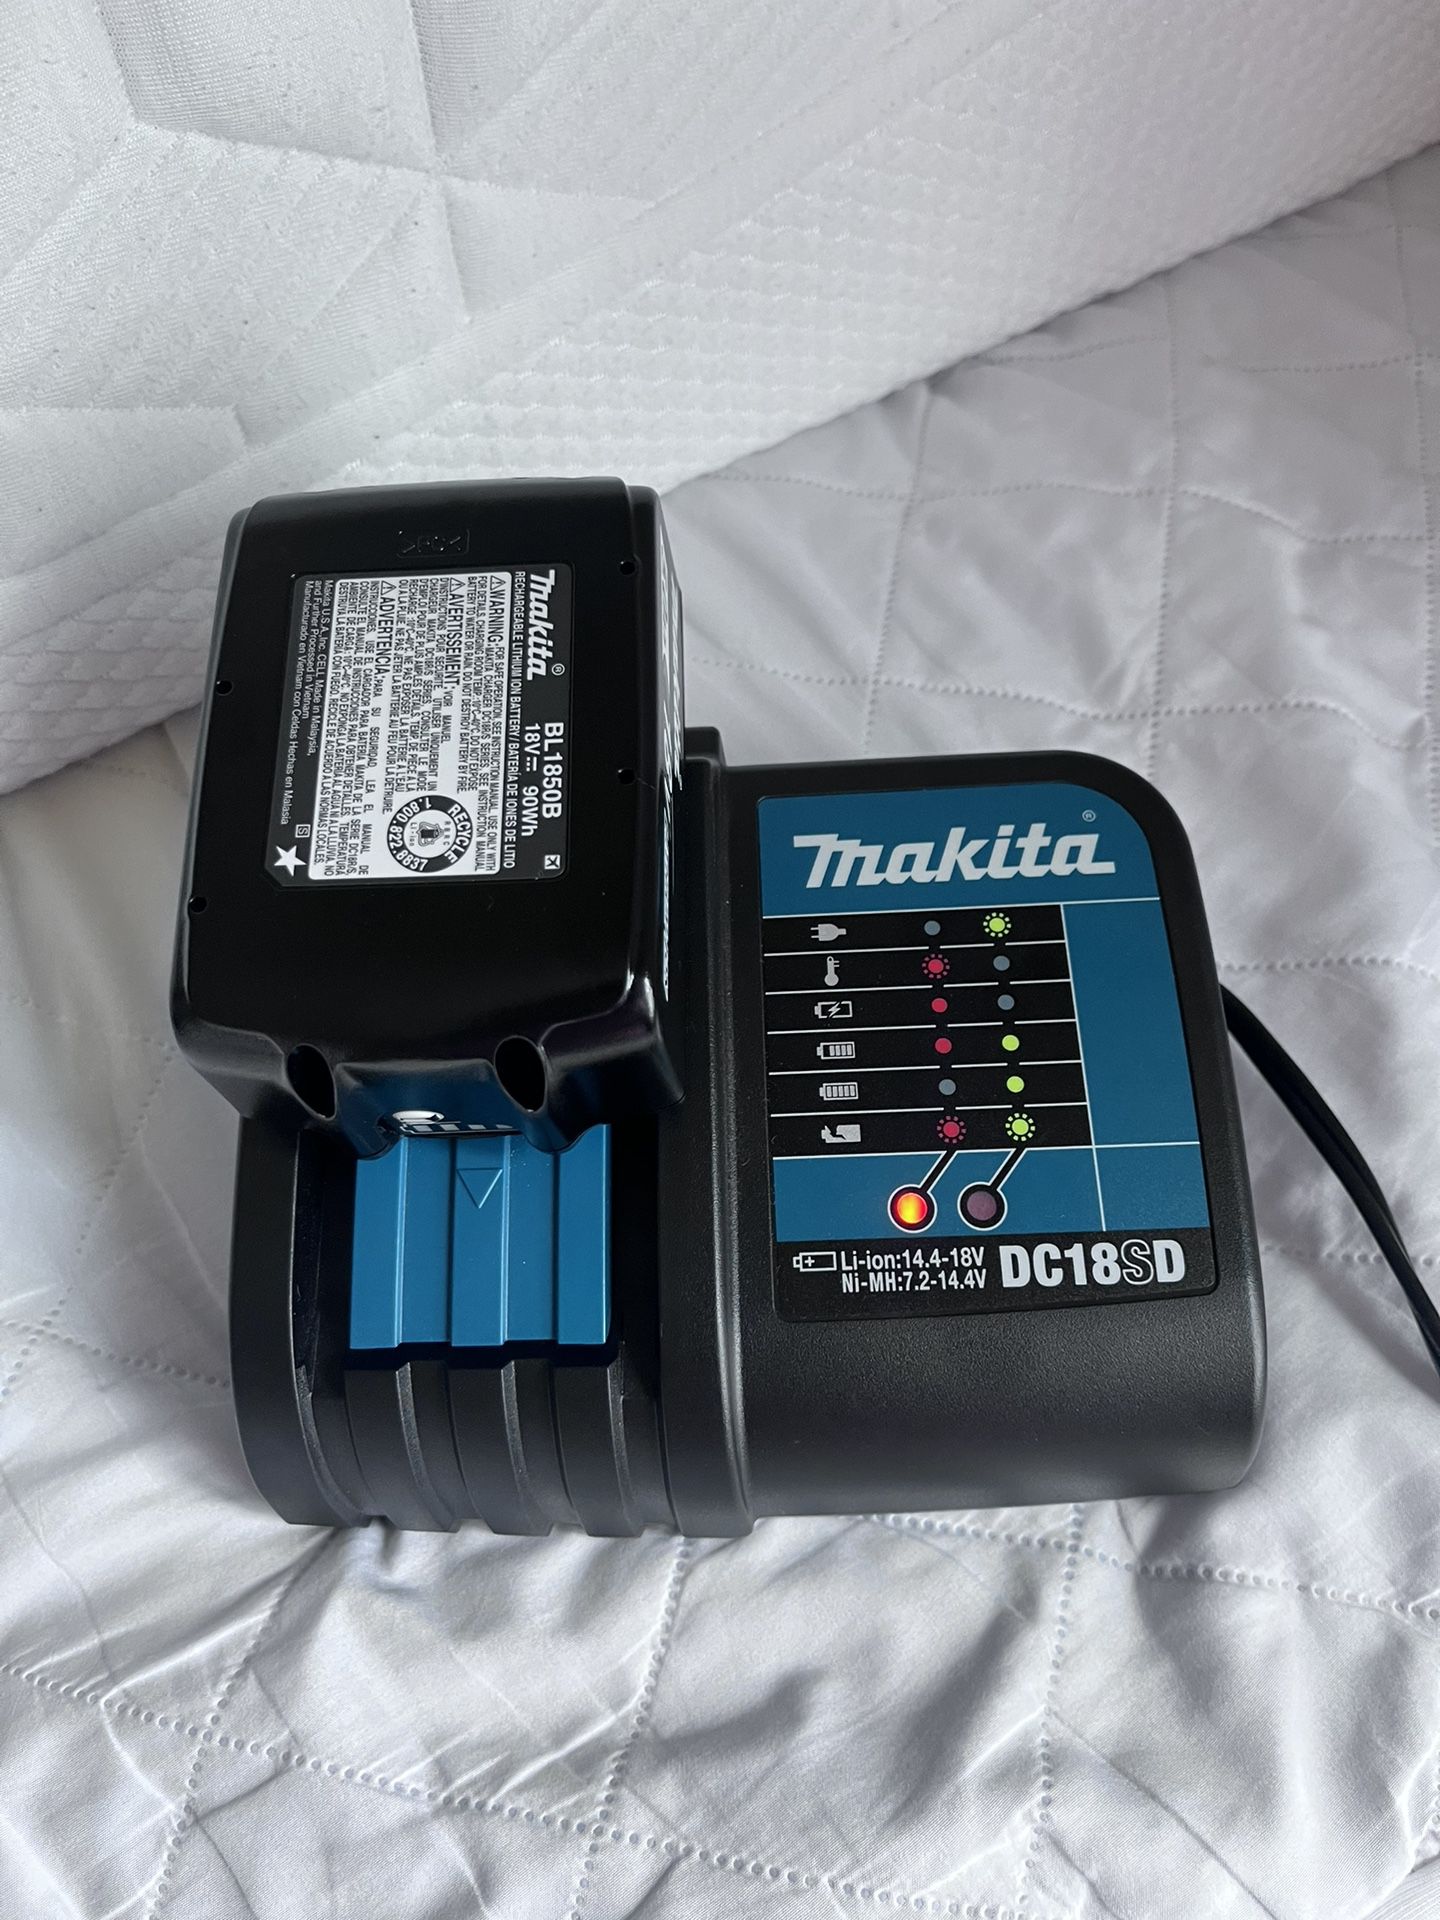 (NEW) Makita Charger and 5.0 battery 